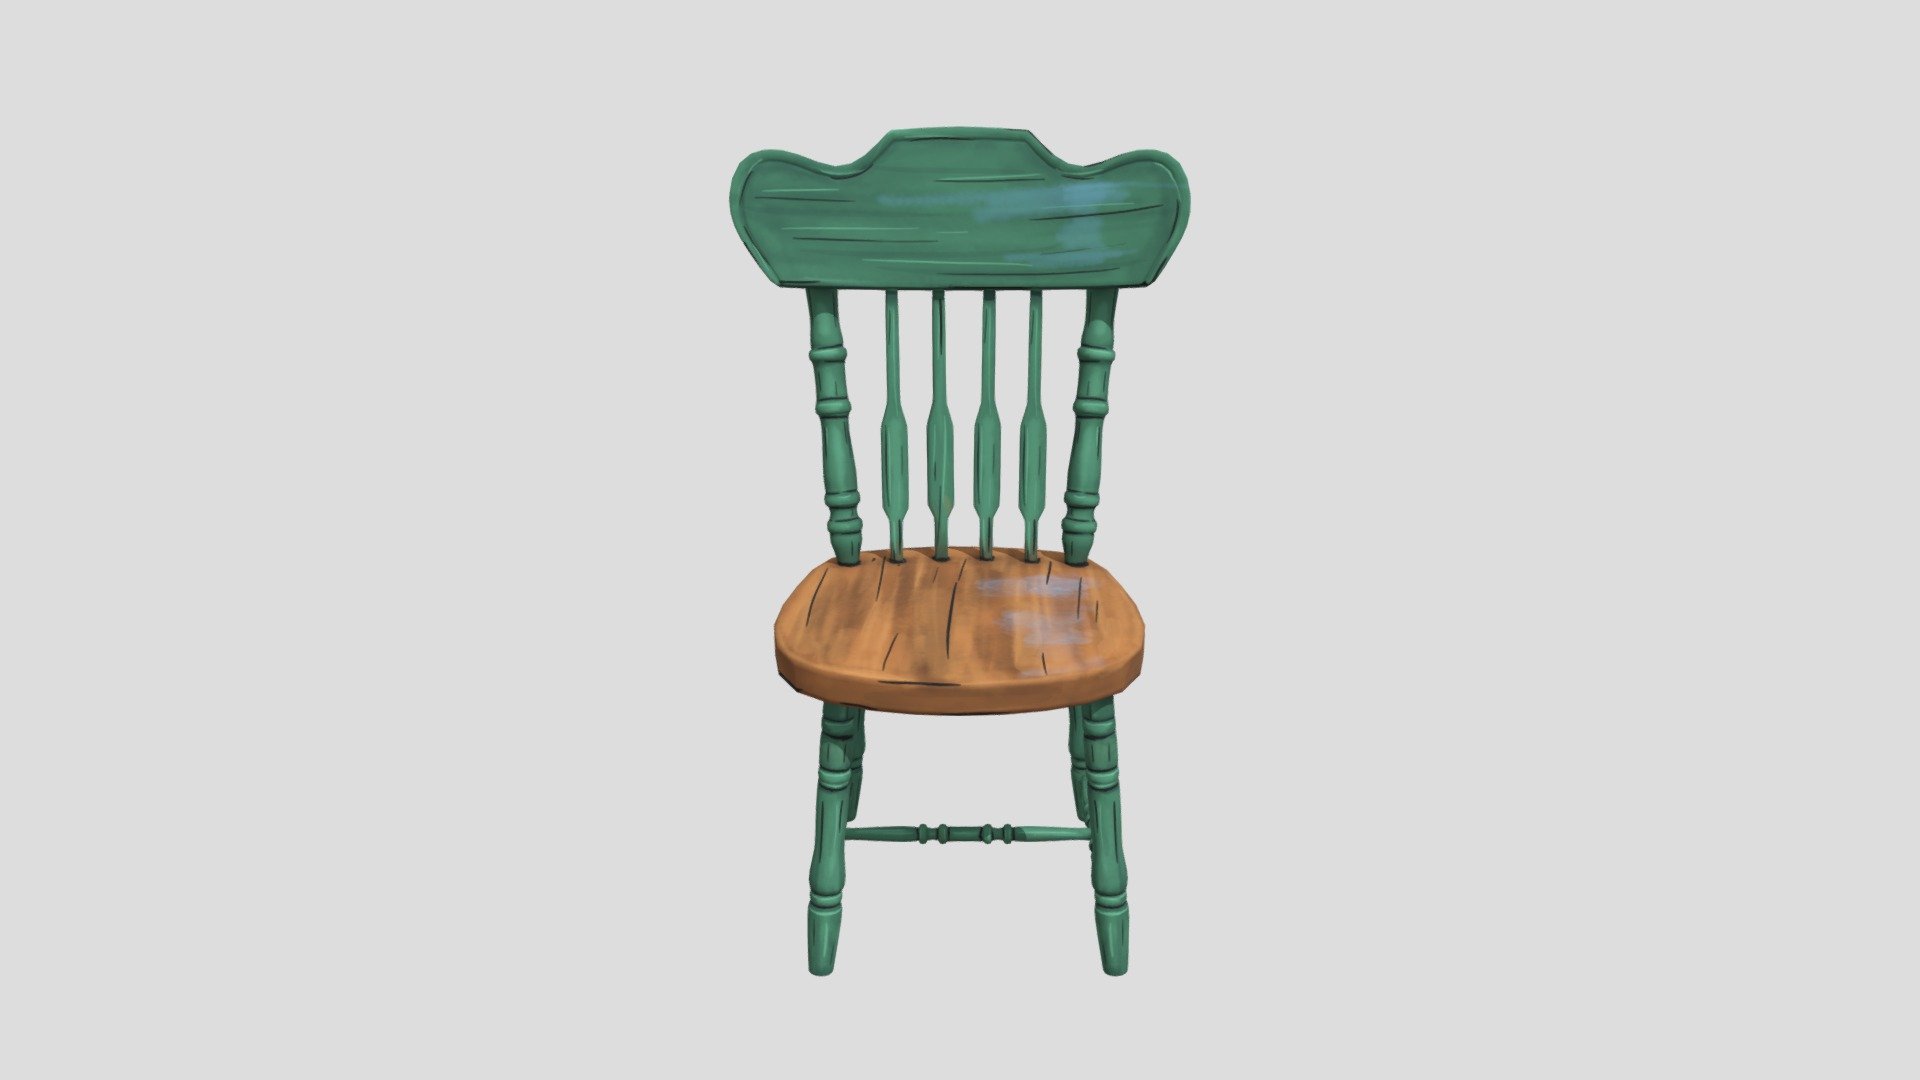 I'm making my kitchen in 3D - Cartoon chair - Download Free 3D model by risuchan 3d model